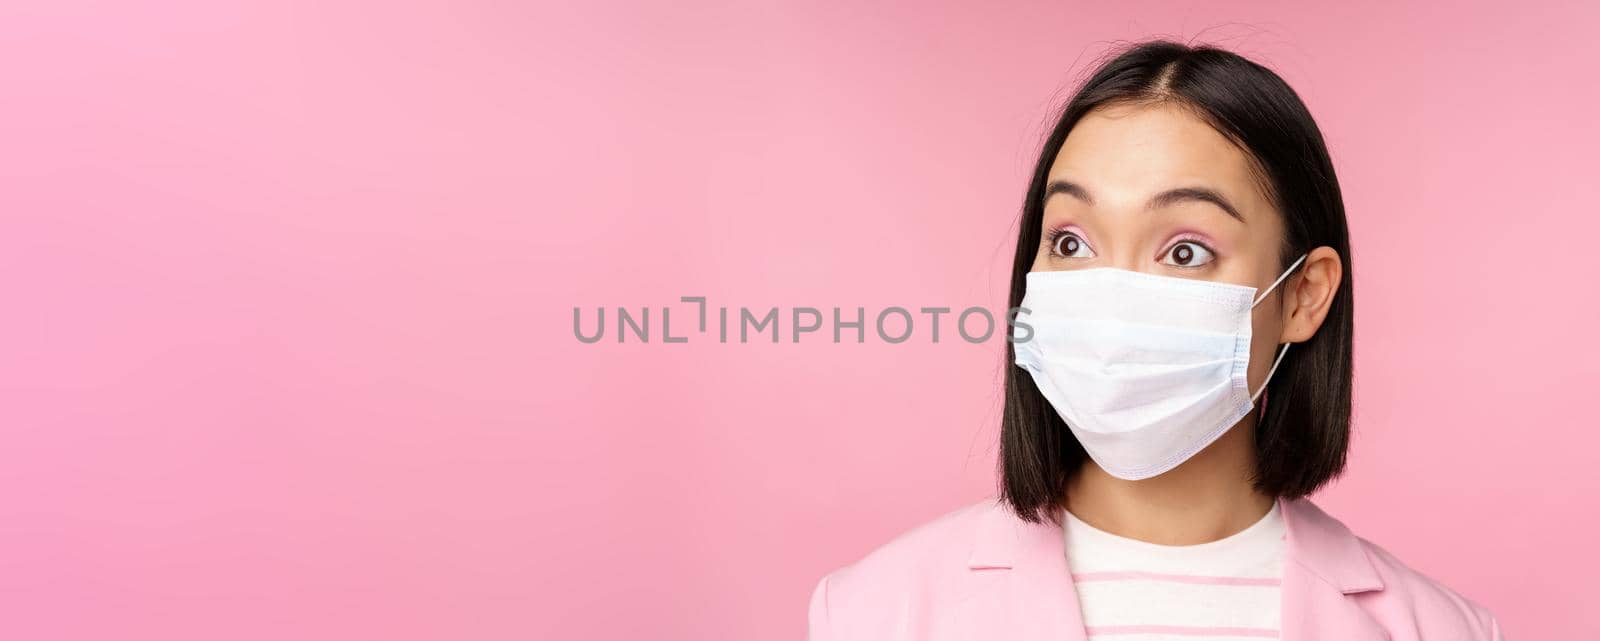 Close-up portrait of asian businesswoman in medical face mask, looking surprised, standing in suit over pink background. Copy space